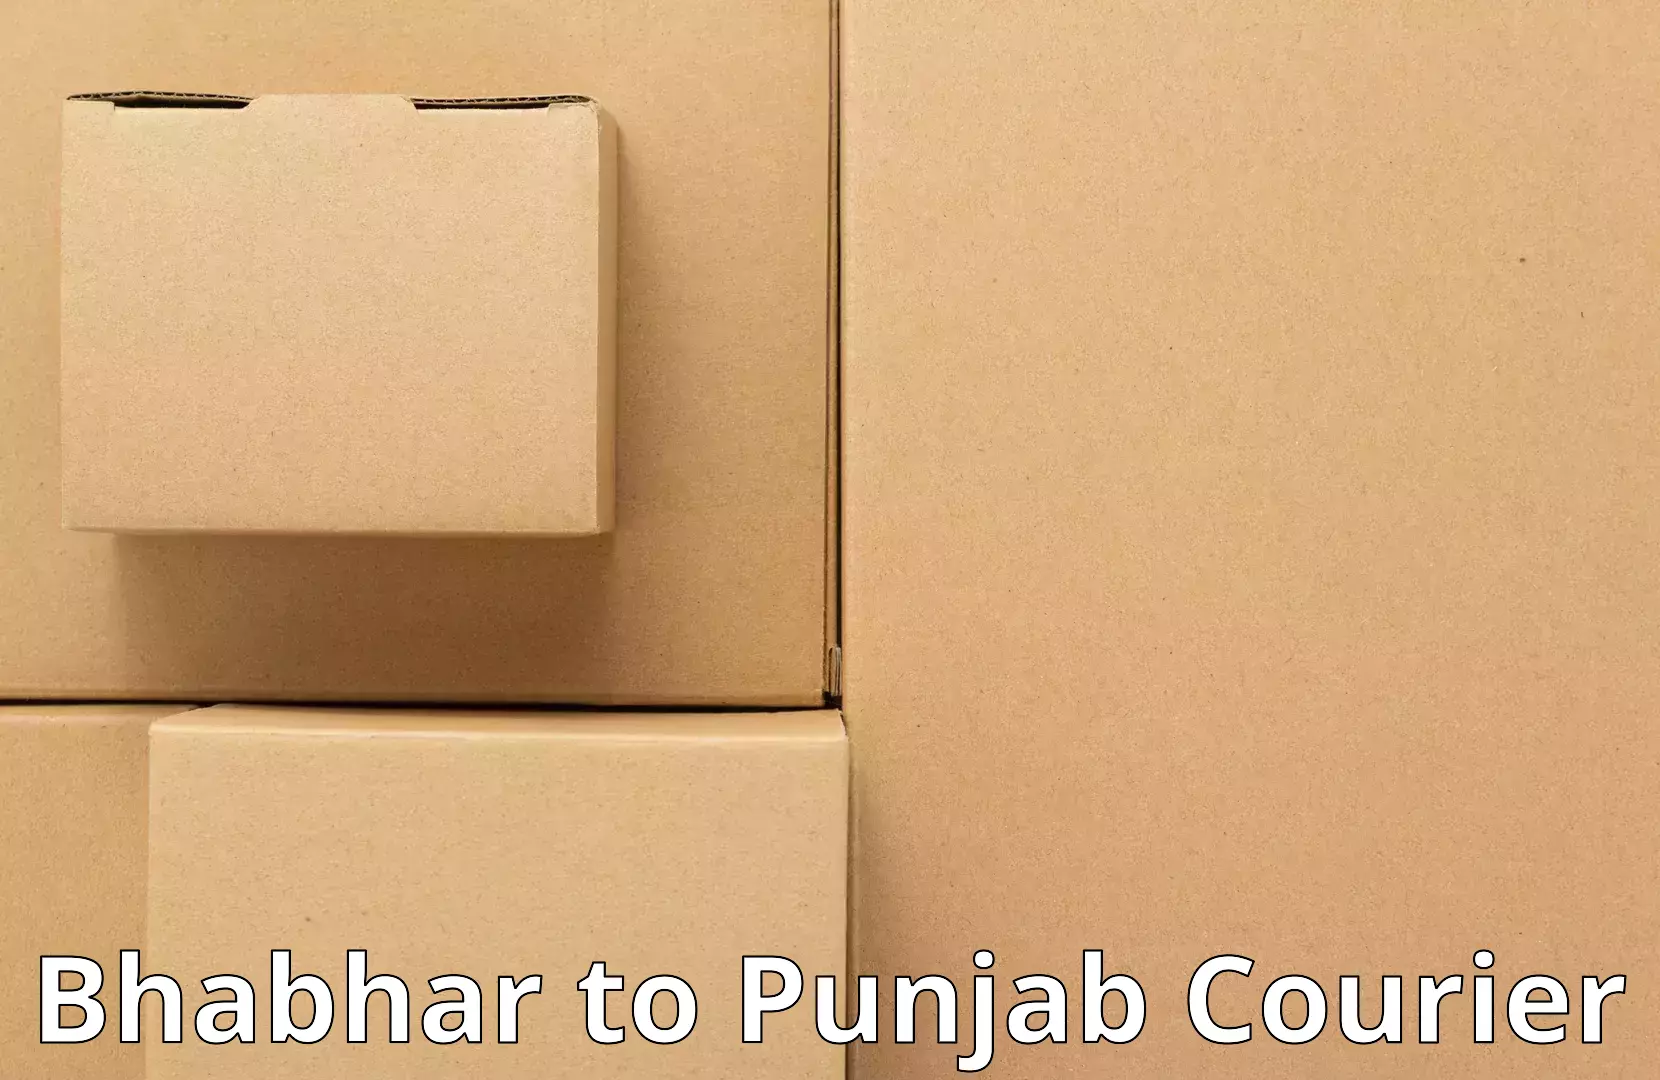 Full home relocation services Bhabhar to Punjab